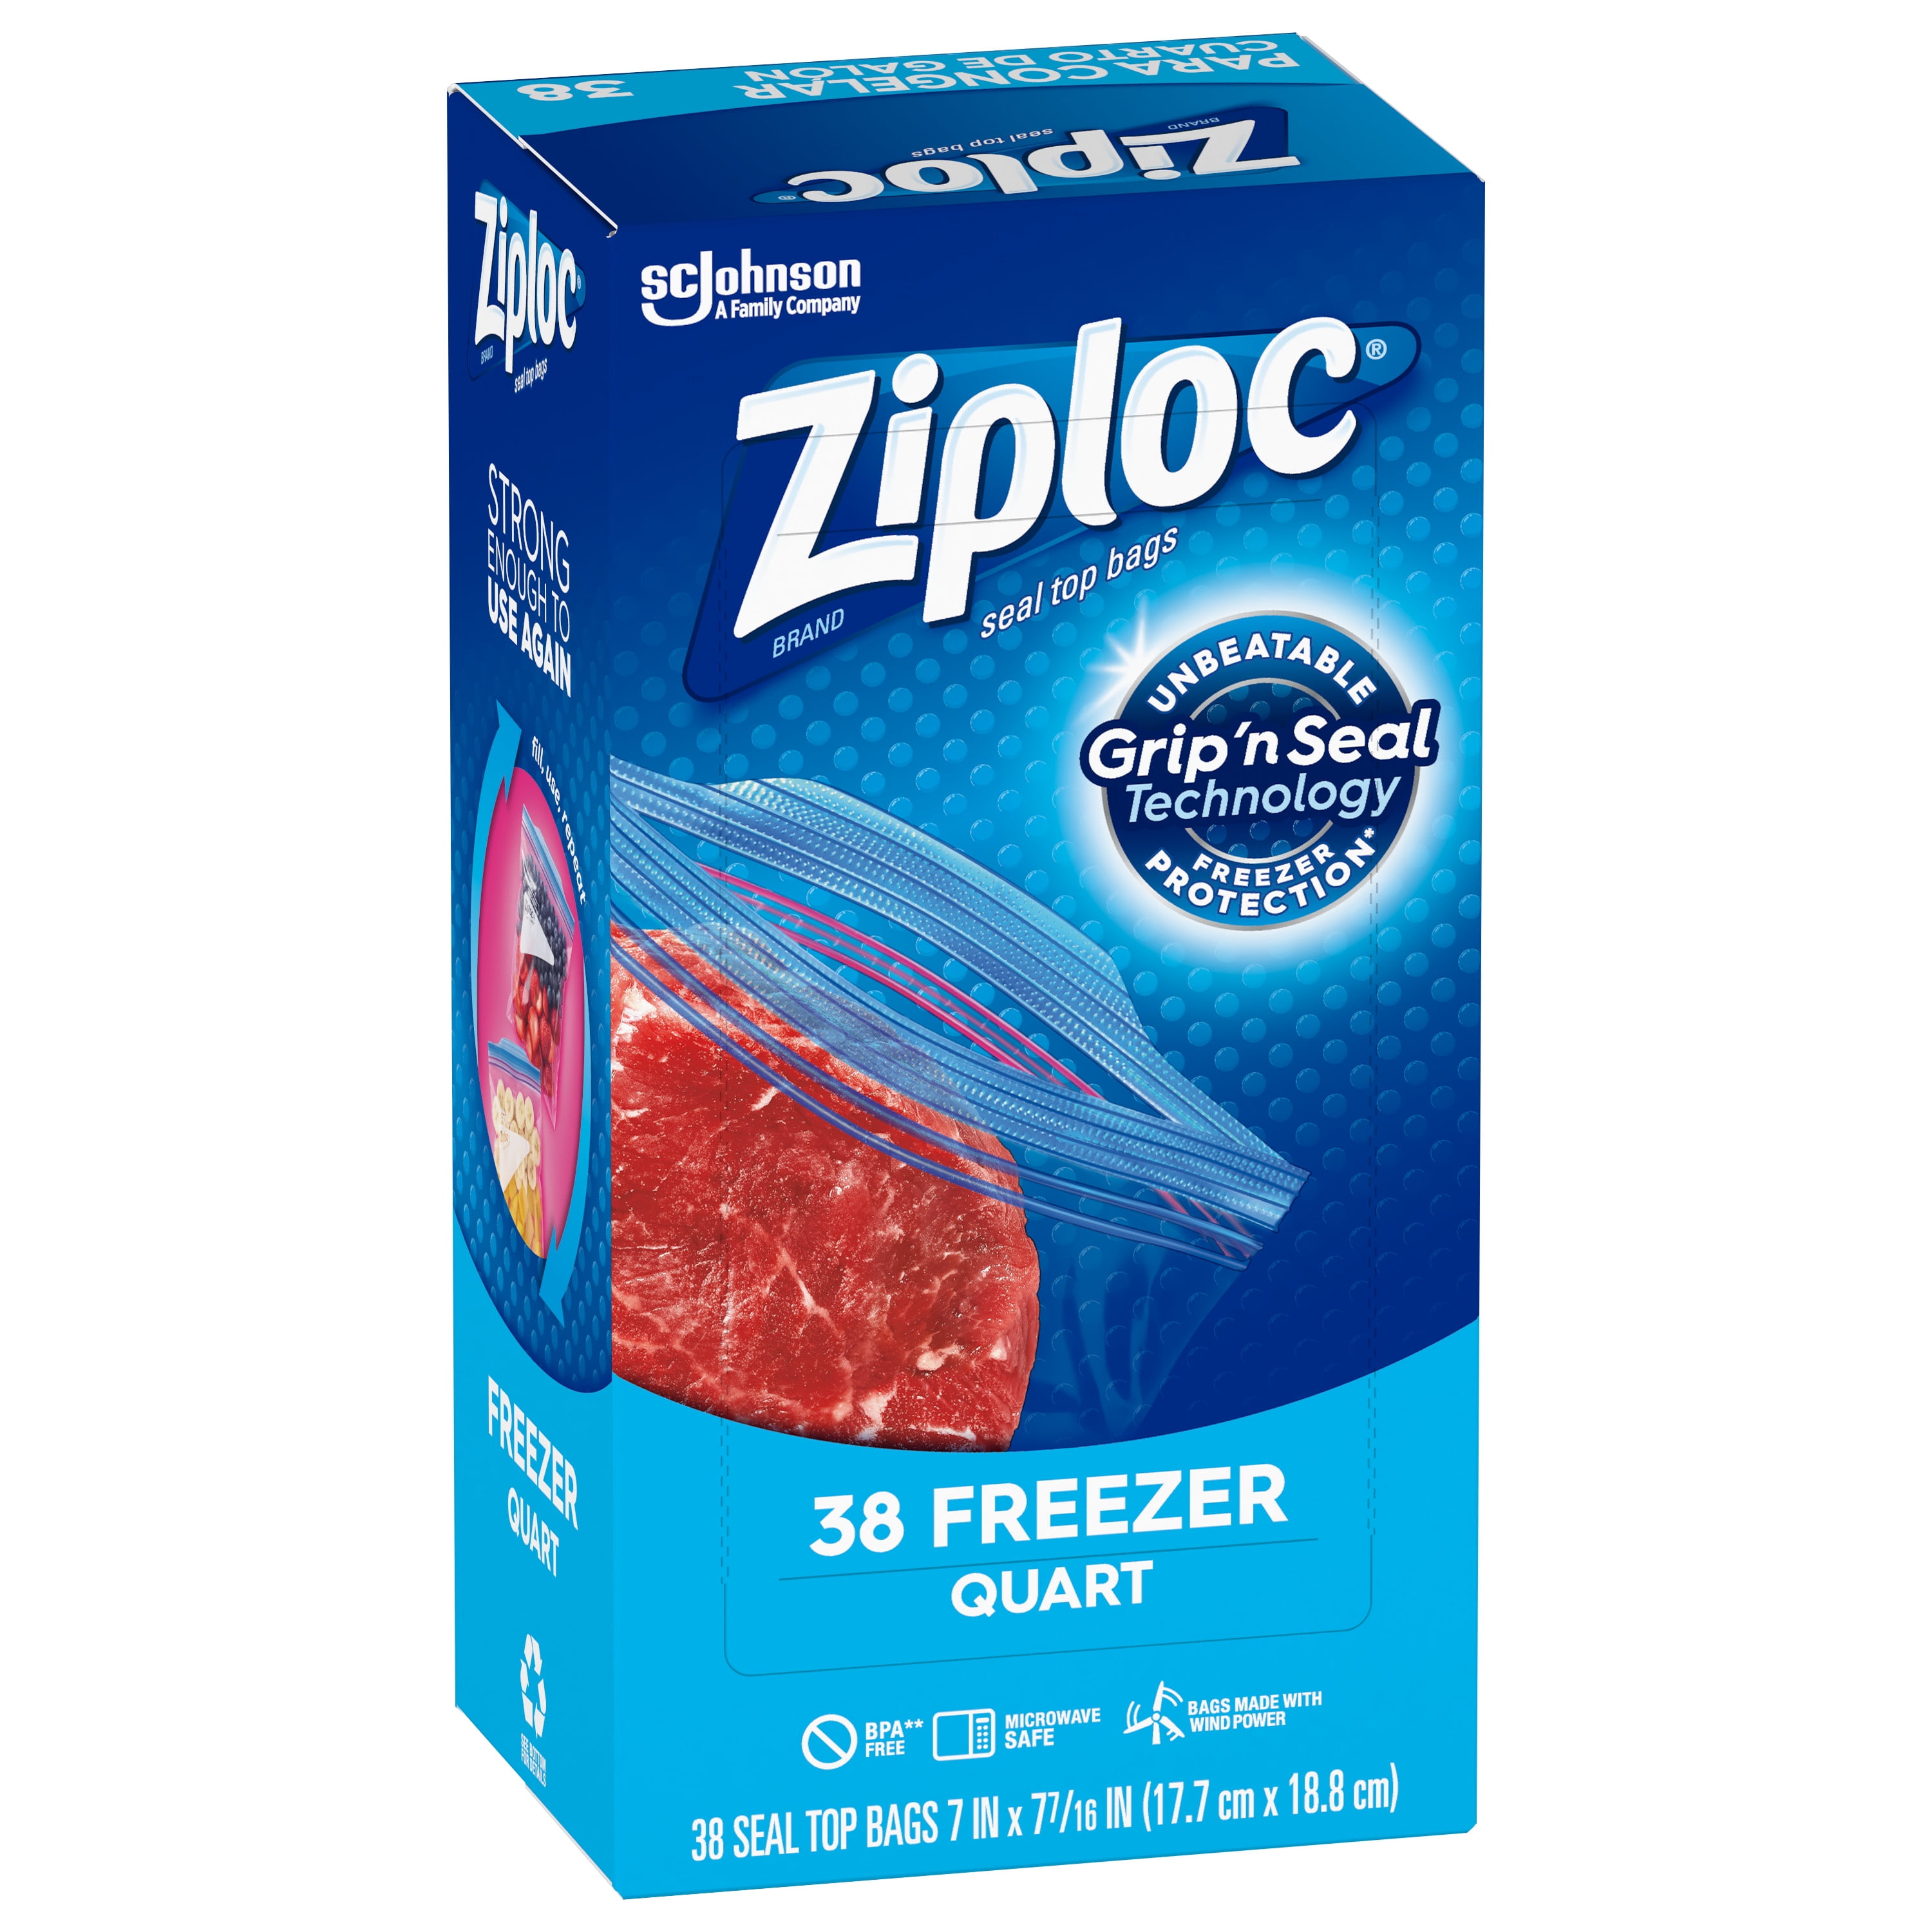 On the Superiority of Target Brand Freezer Bags over Ziplock: A